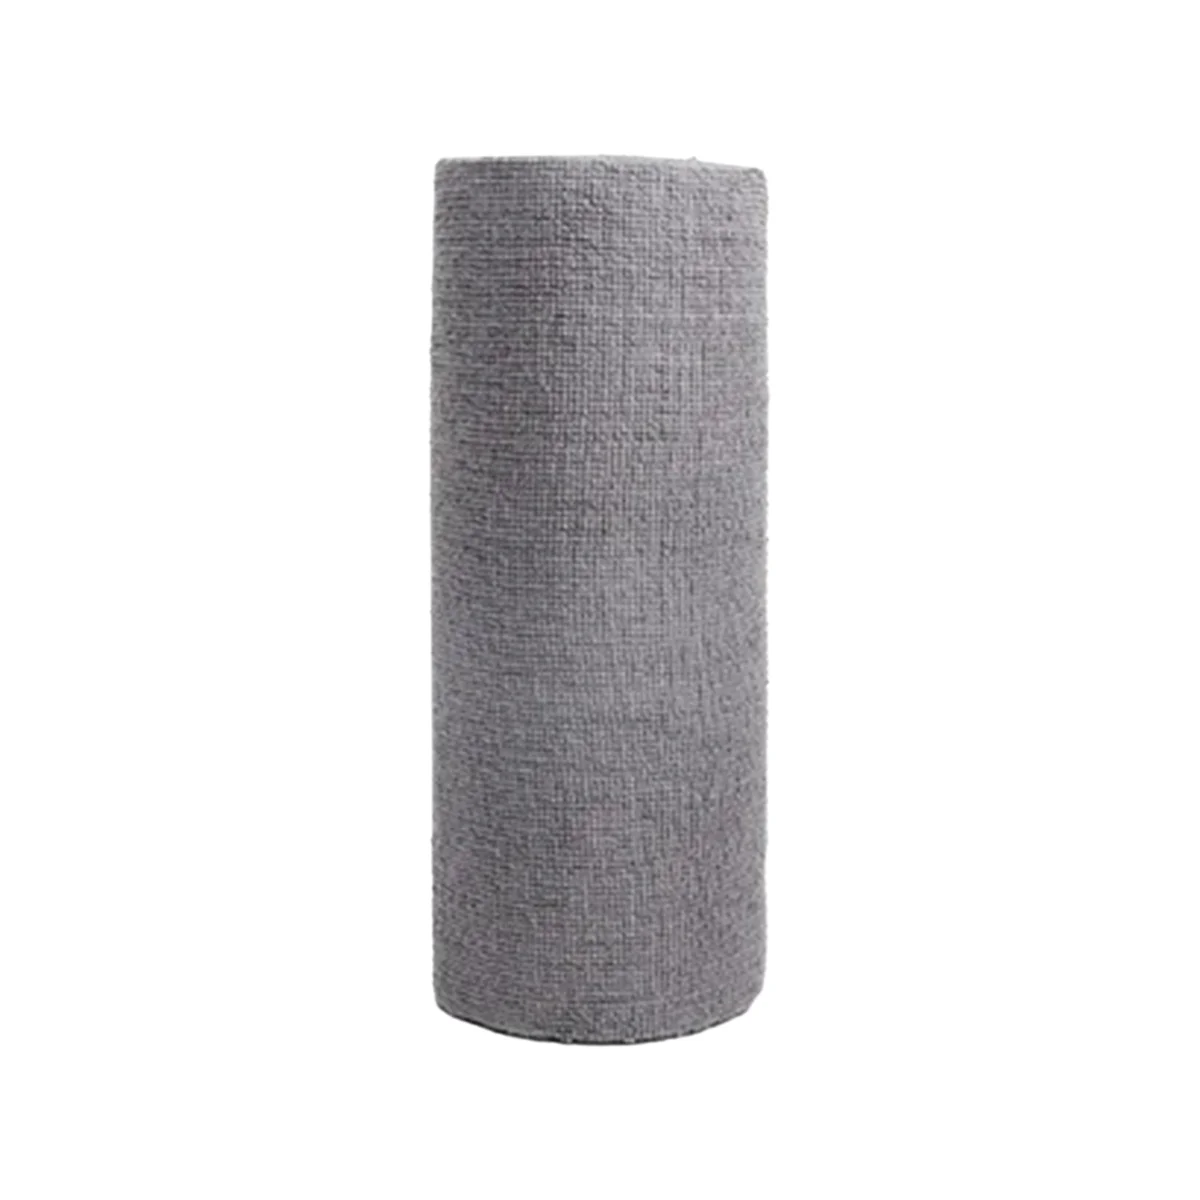 

Reusable Cleaning Wipe Household Microfiber Towel Rolls Dish Rags Wash Paper Towel Replacement Grey